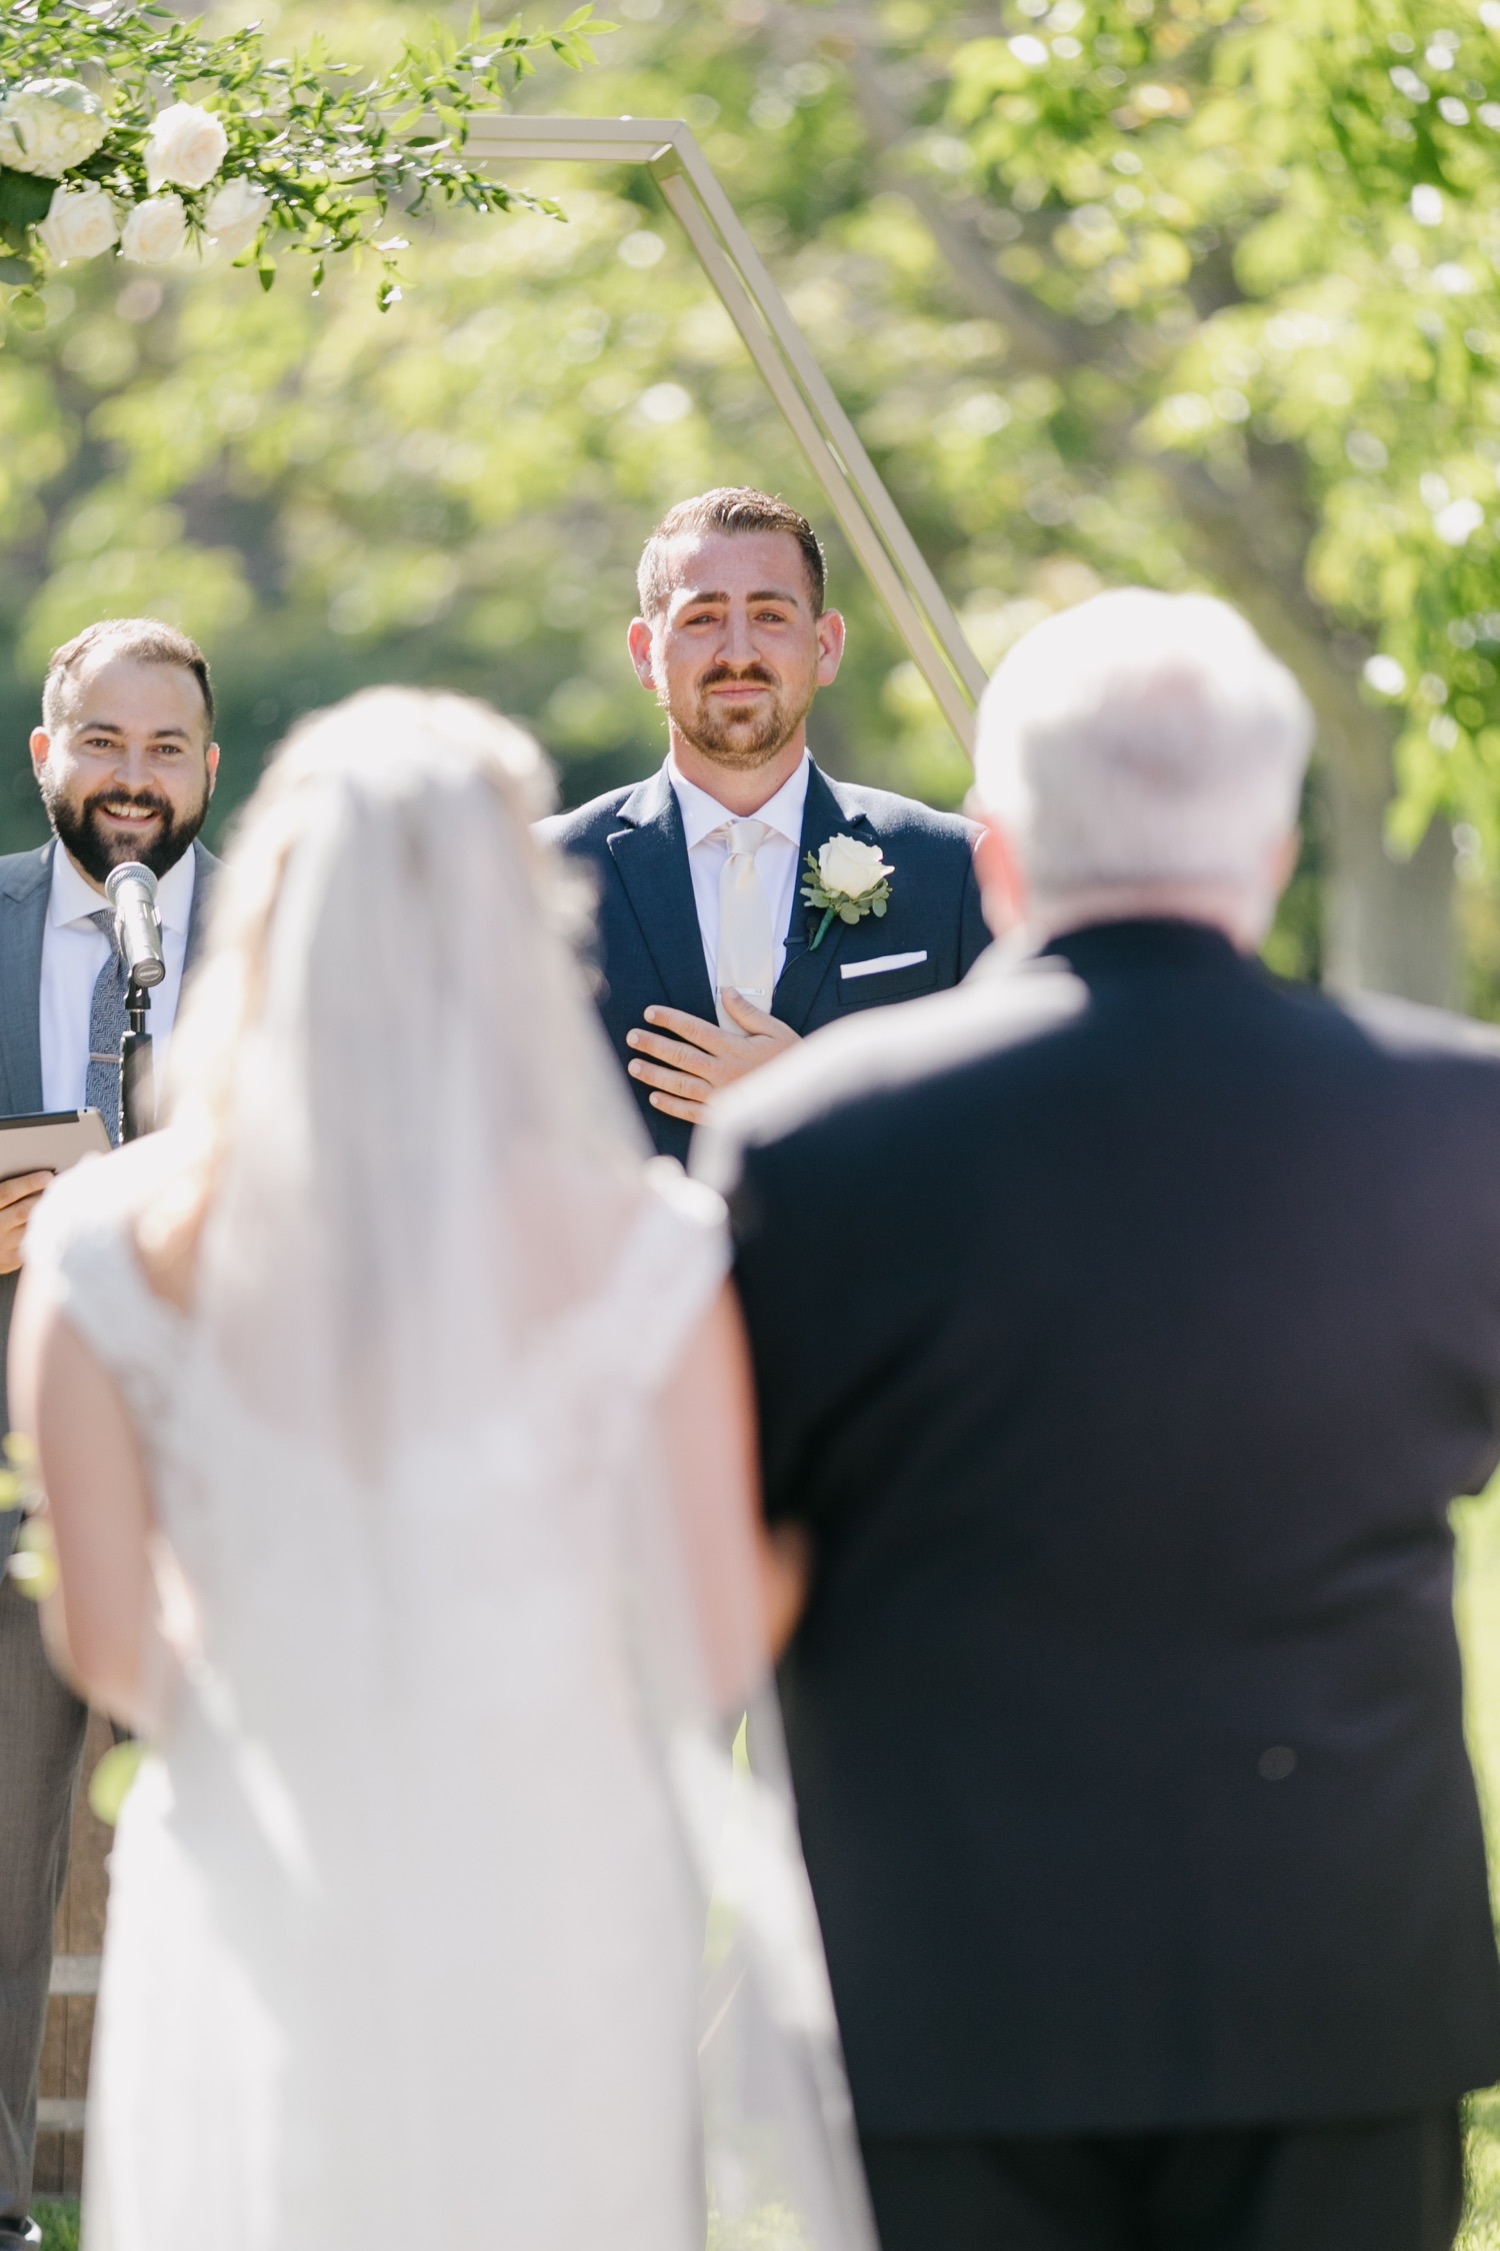 Groom getting emotional as he sees his bride walk down the aisle for the first time at walnut grove wedding ceremony. Sweetest first look